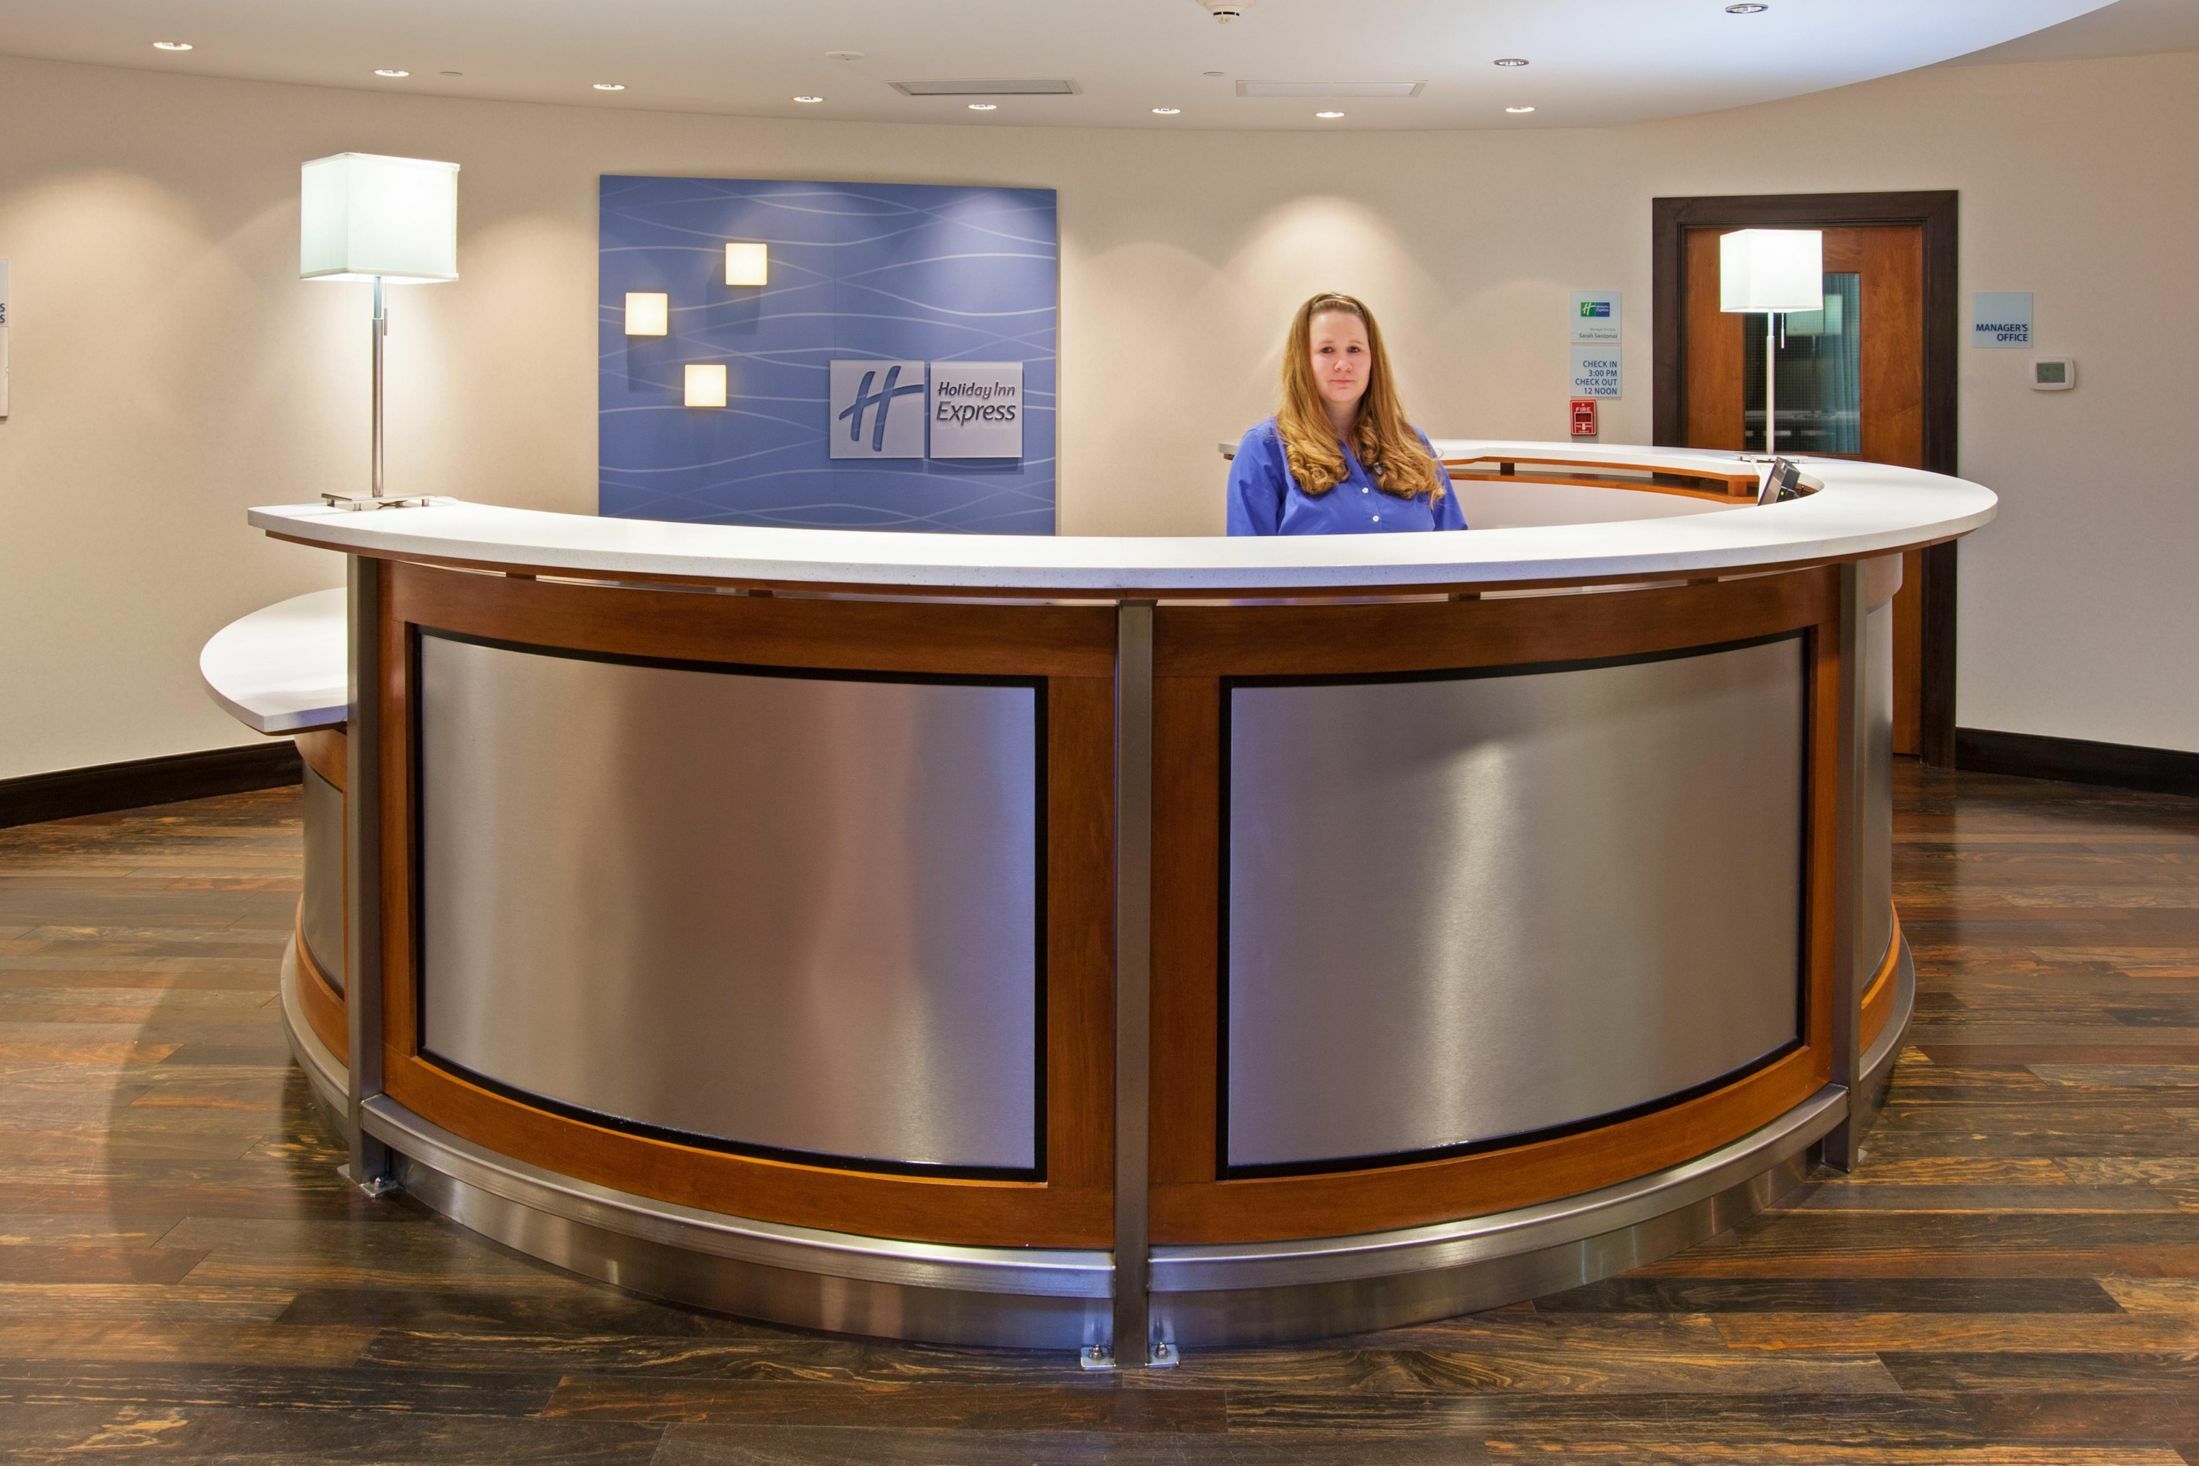 Photo of Holiday Inn Express Indianapolis - Fishers, Osgood, IN